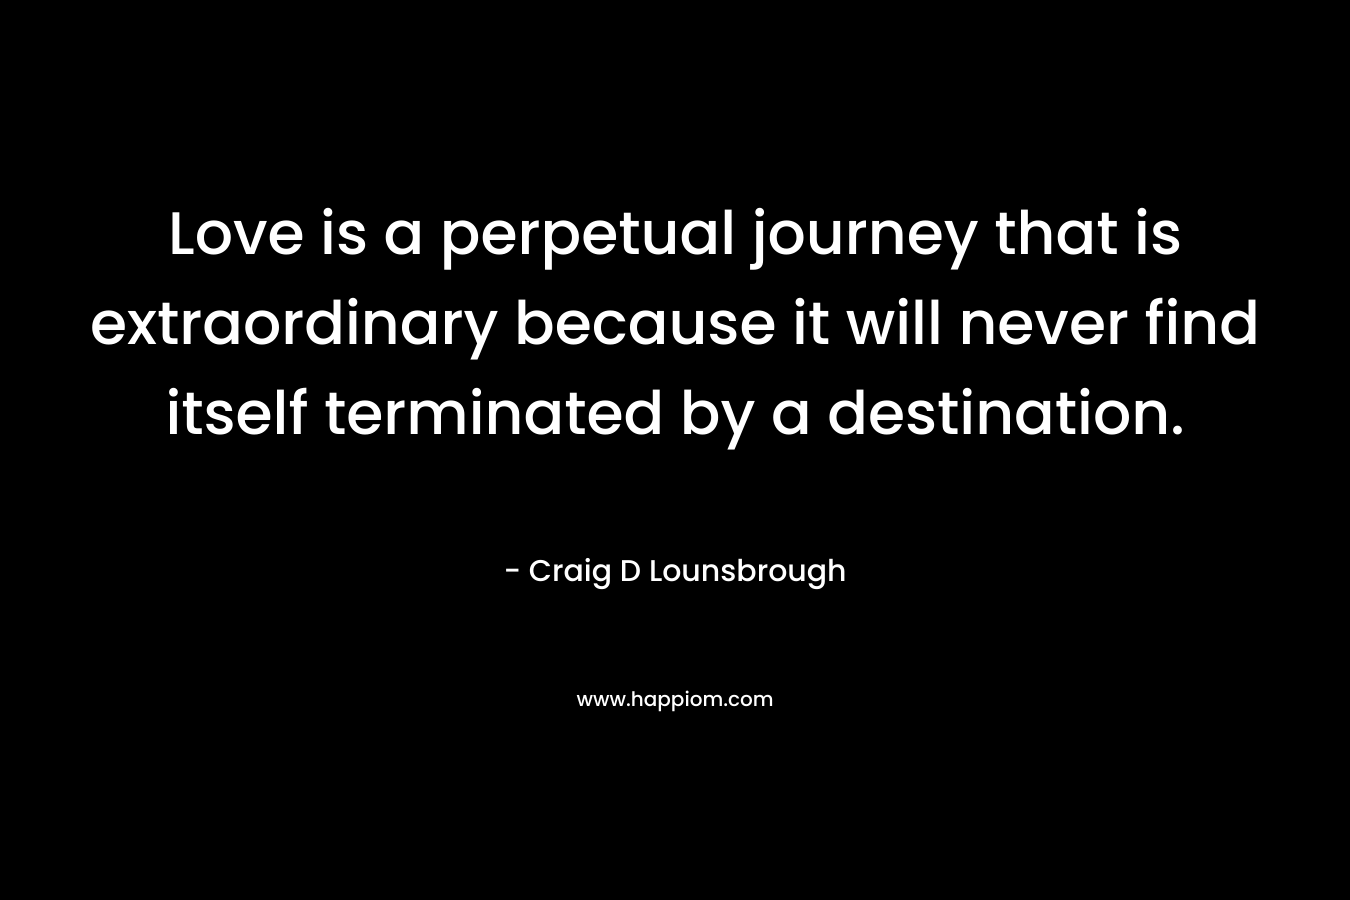 Love is a perpetual journey that is extraordinary because it will never find itself terminated by a destination. – Craig D Lounsbrough